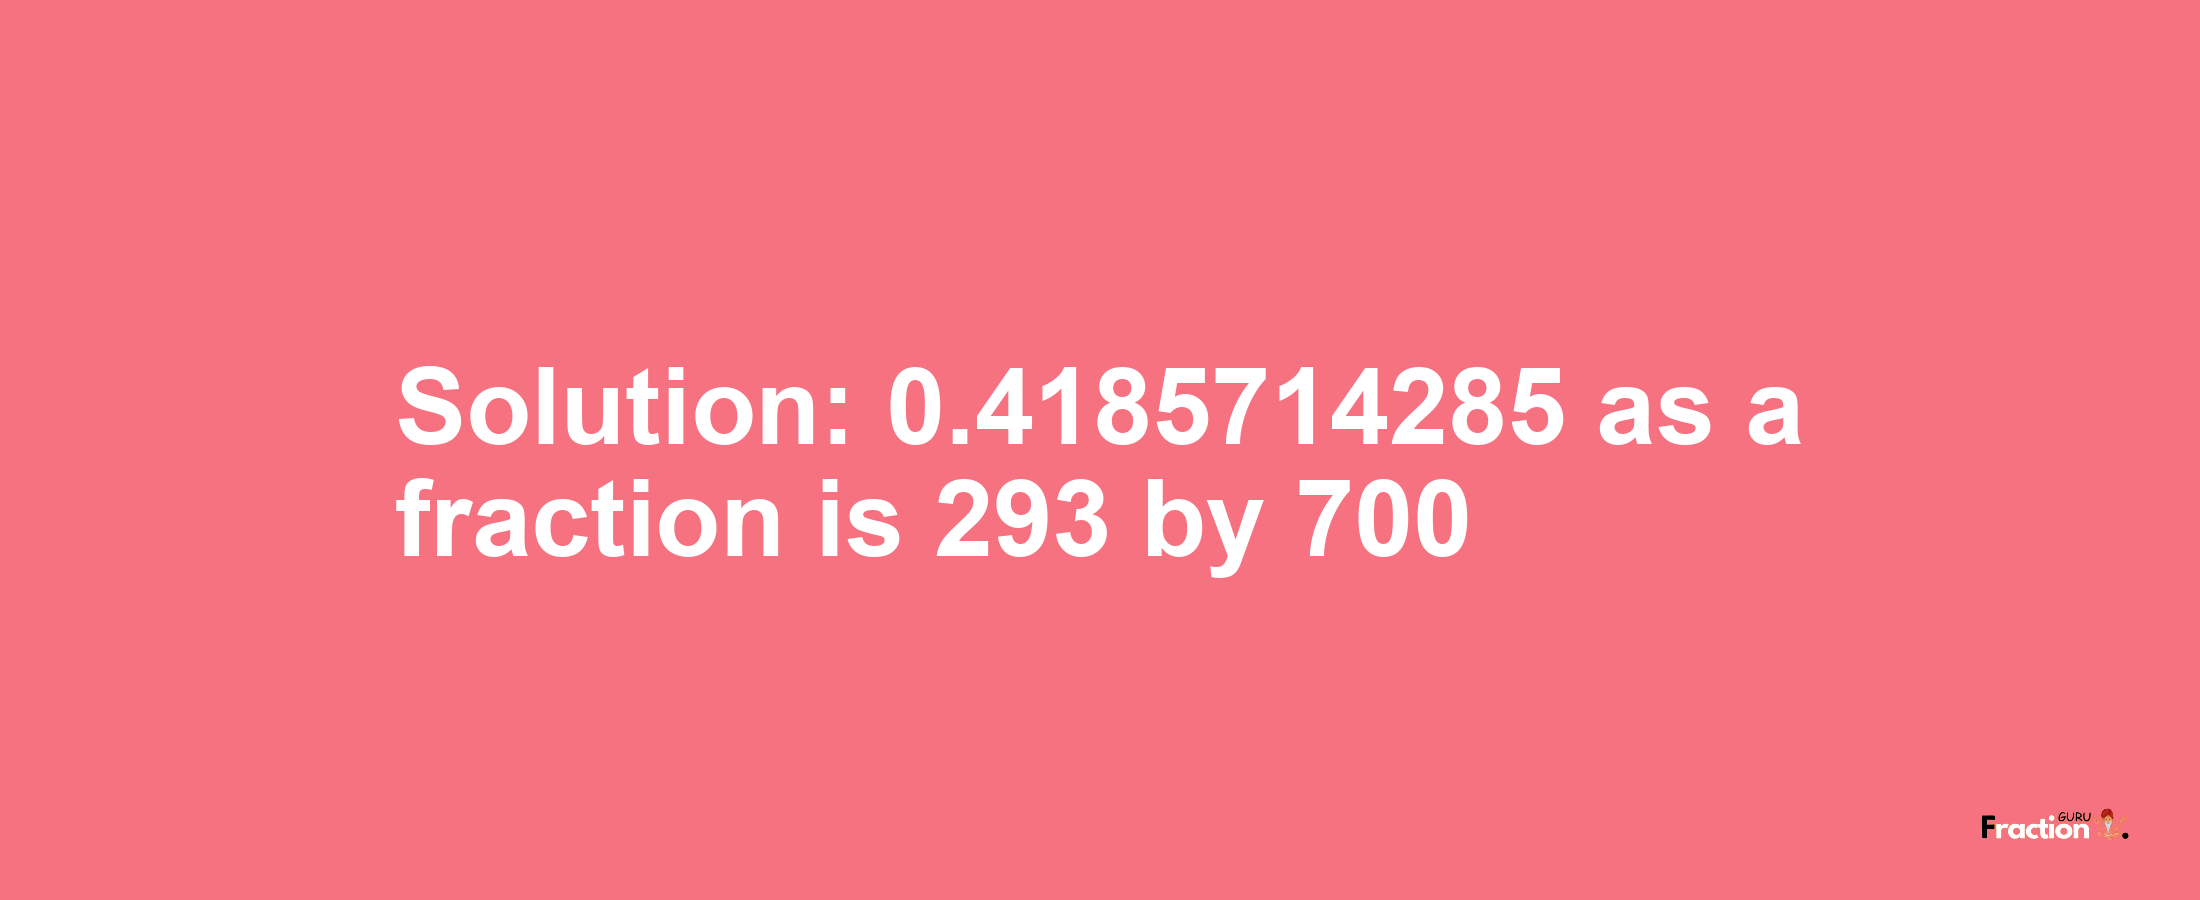 Solution:0.4185714285 as a fraction is 293/700